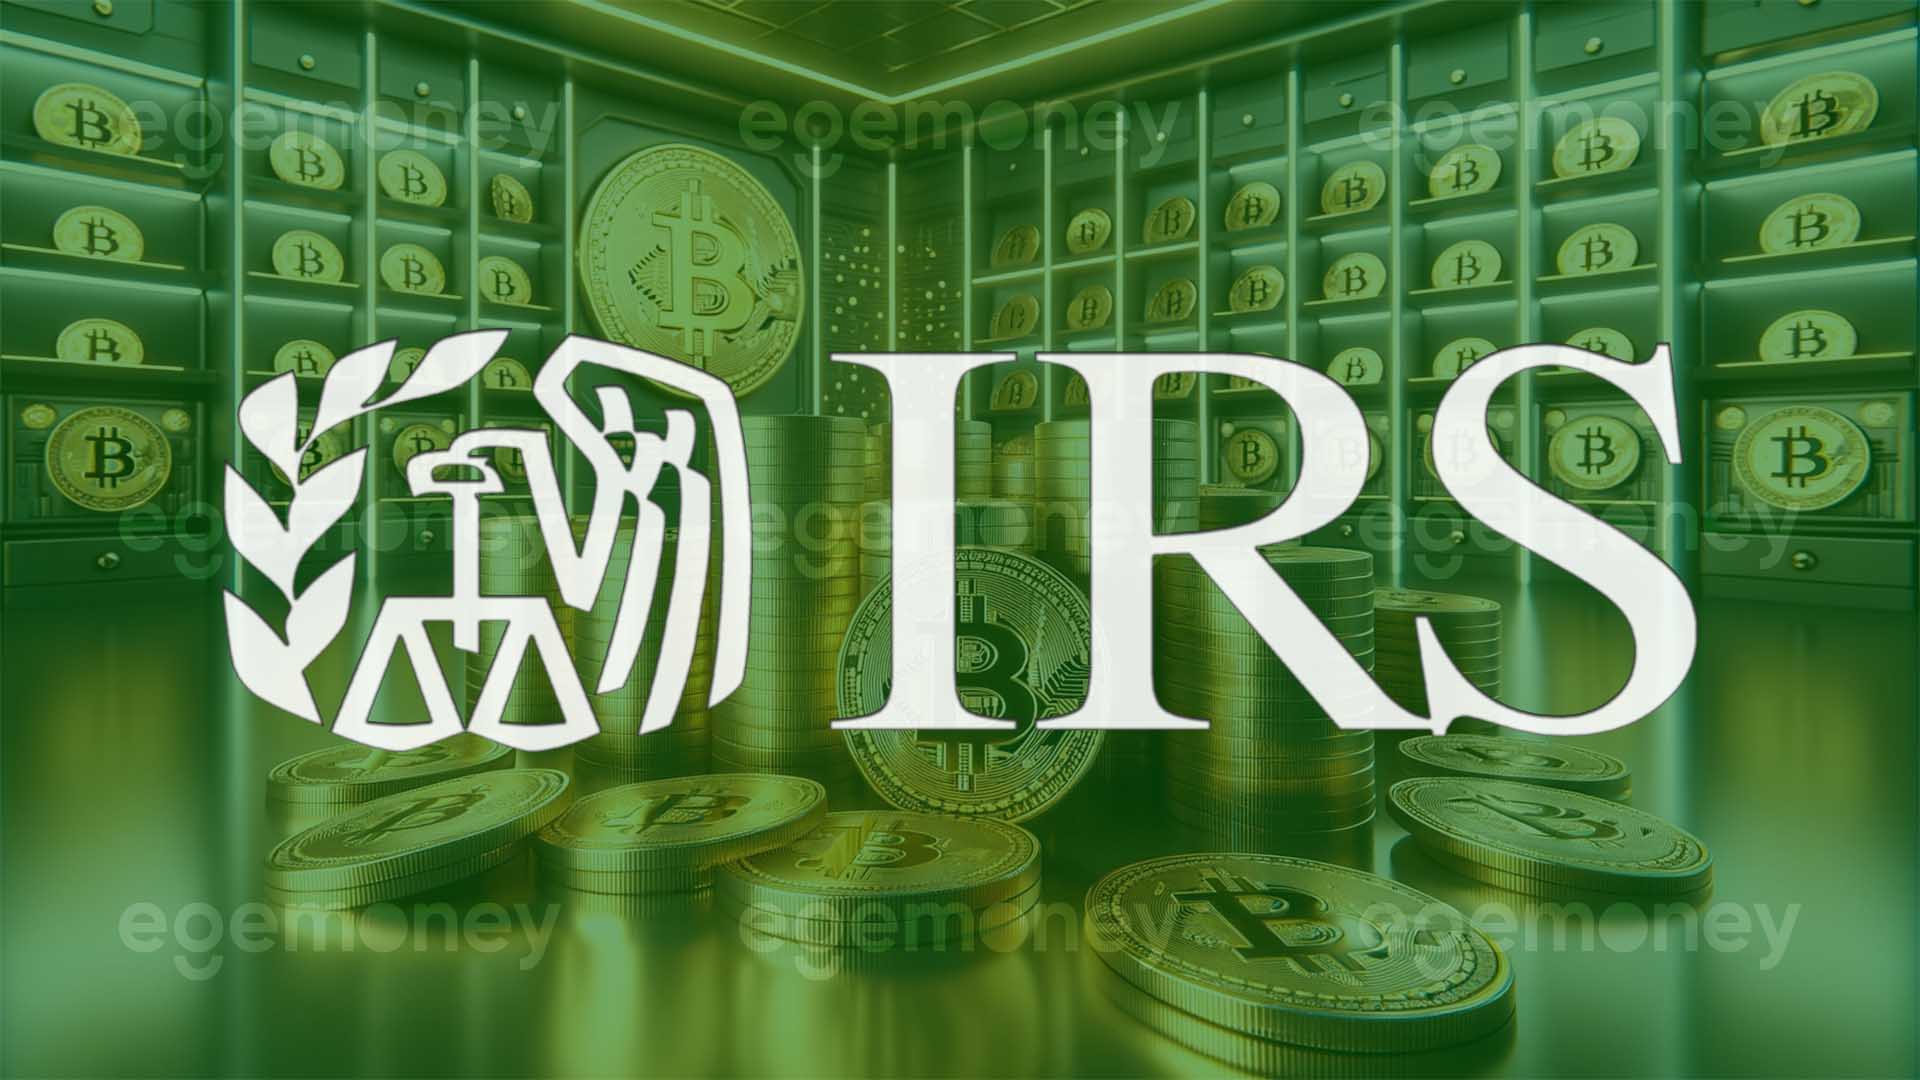 IRS: Reporting Rule Not Applied for Cryptocurrency